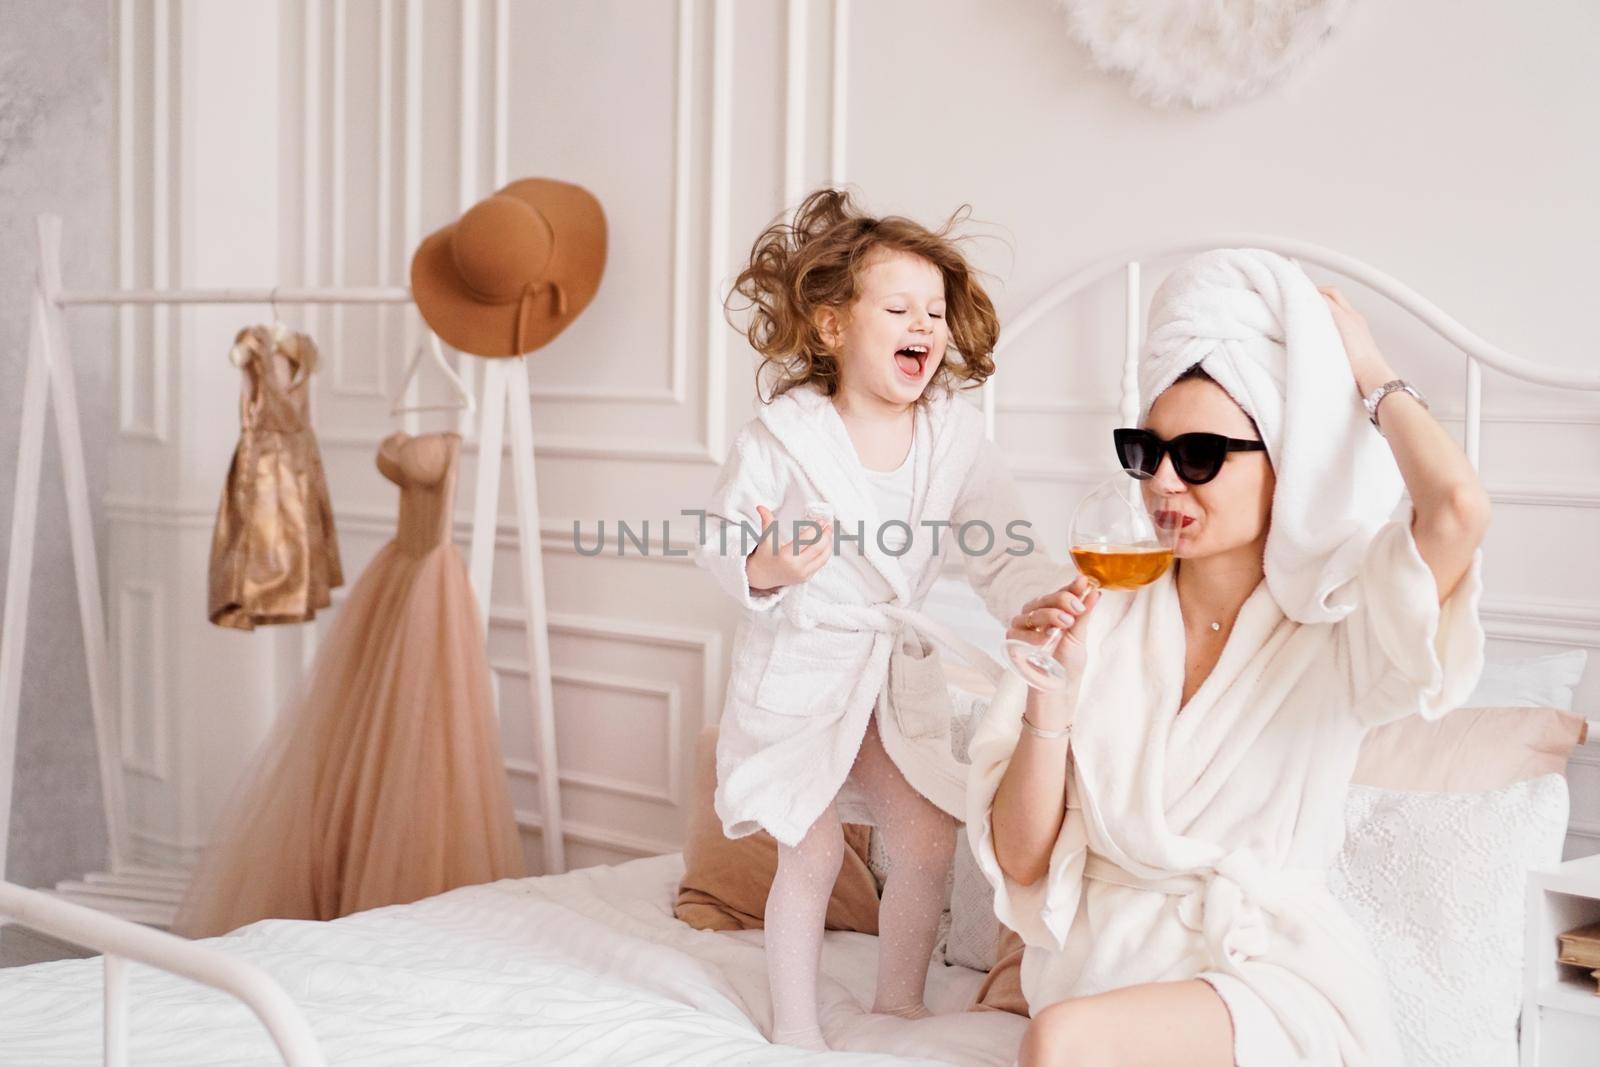 Mother and daughter in the bedroom in bathrobes. Happy daughter is jumping by natali_brill